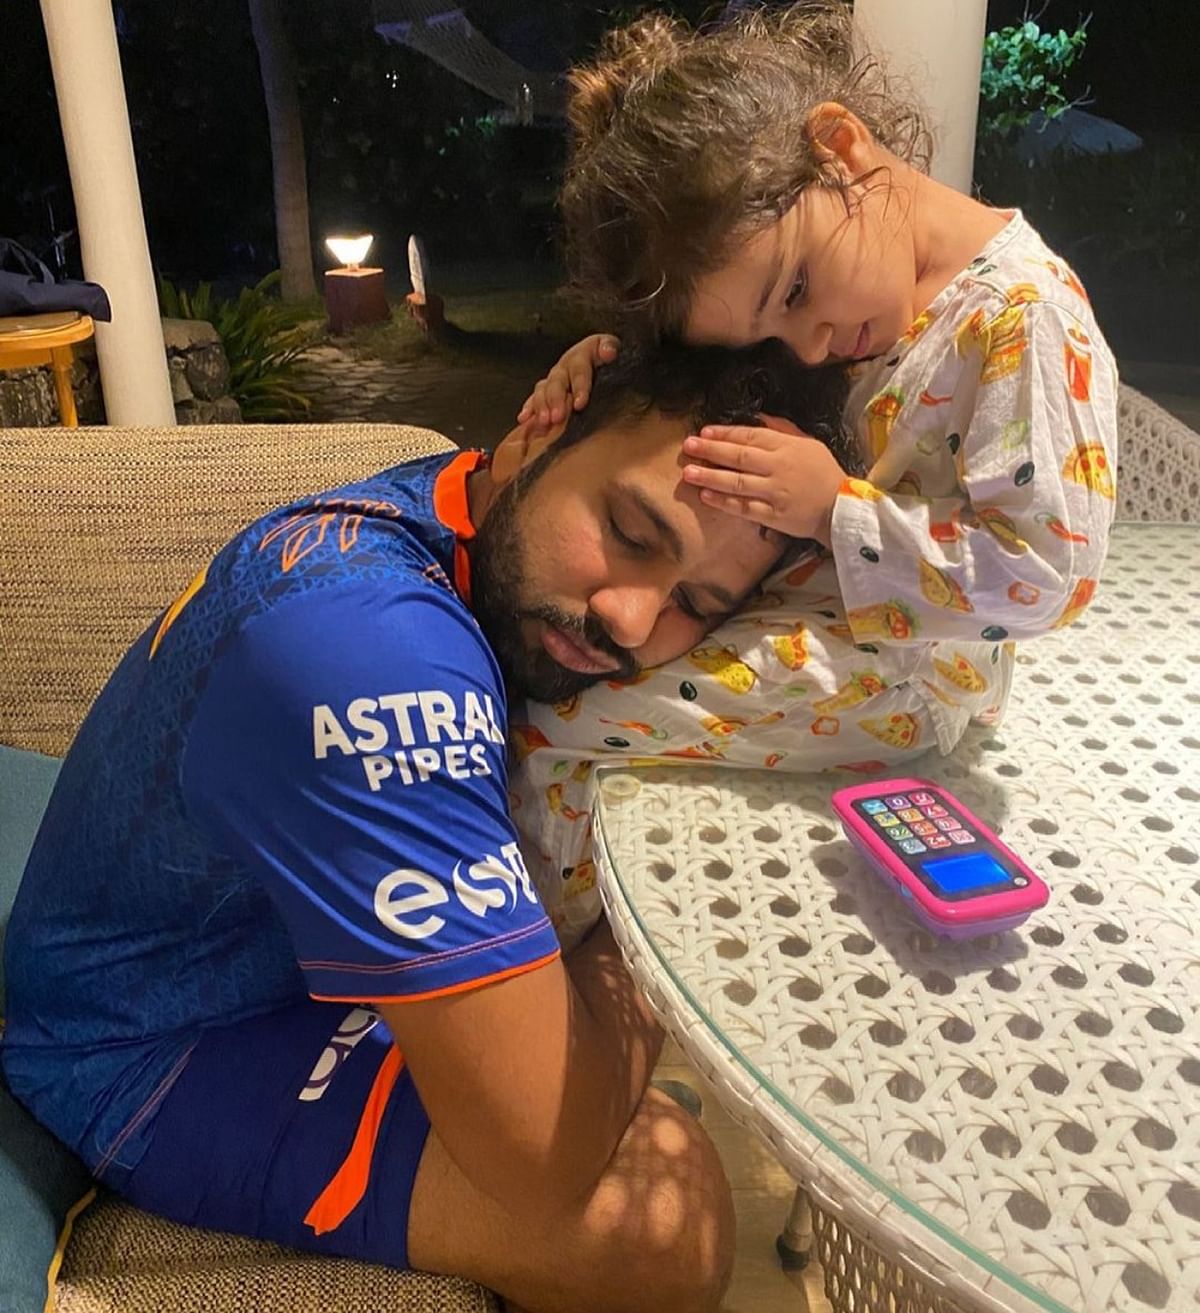 On Rohit Sharma's 34th birthday, Ritika shared an adorable picture of him sharing a priceless moment with his daughter. Credit: Instagram/ritssajdeh